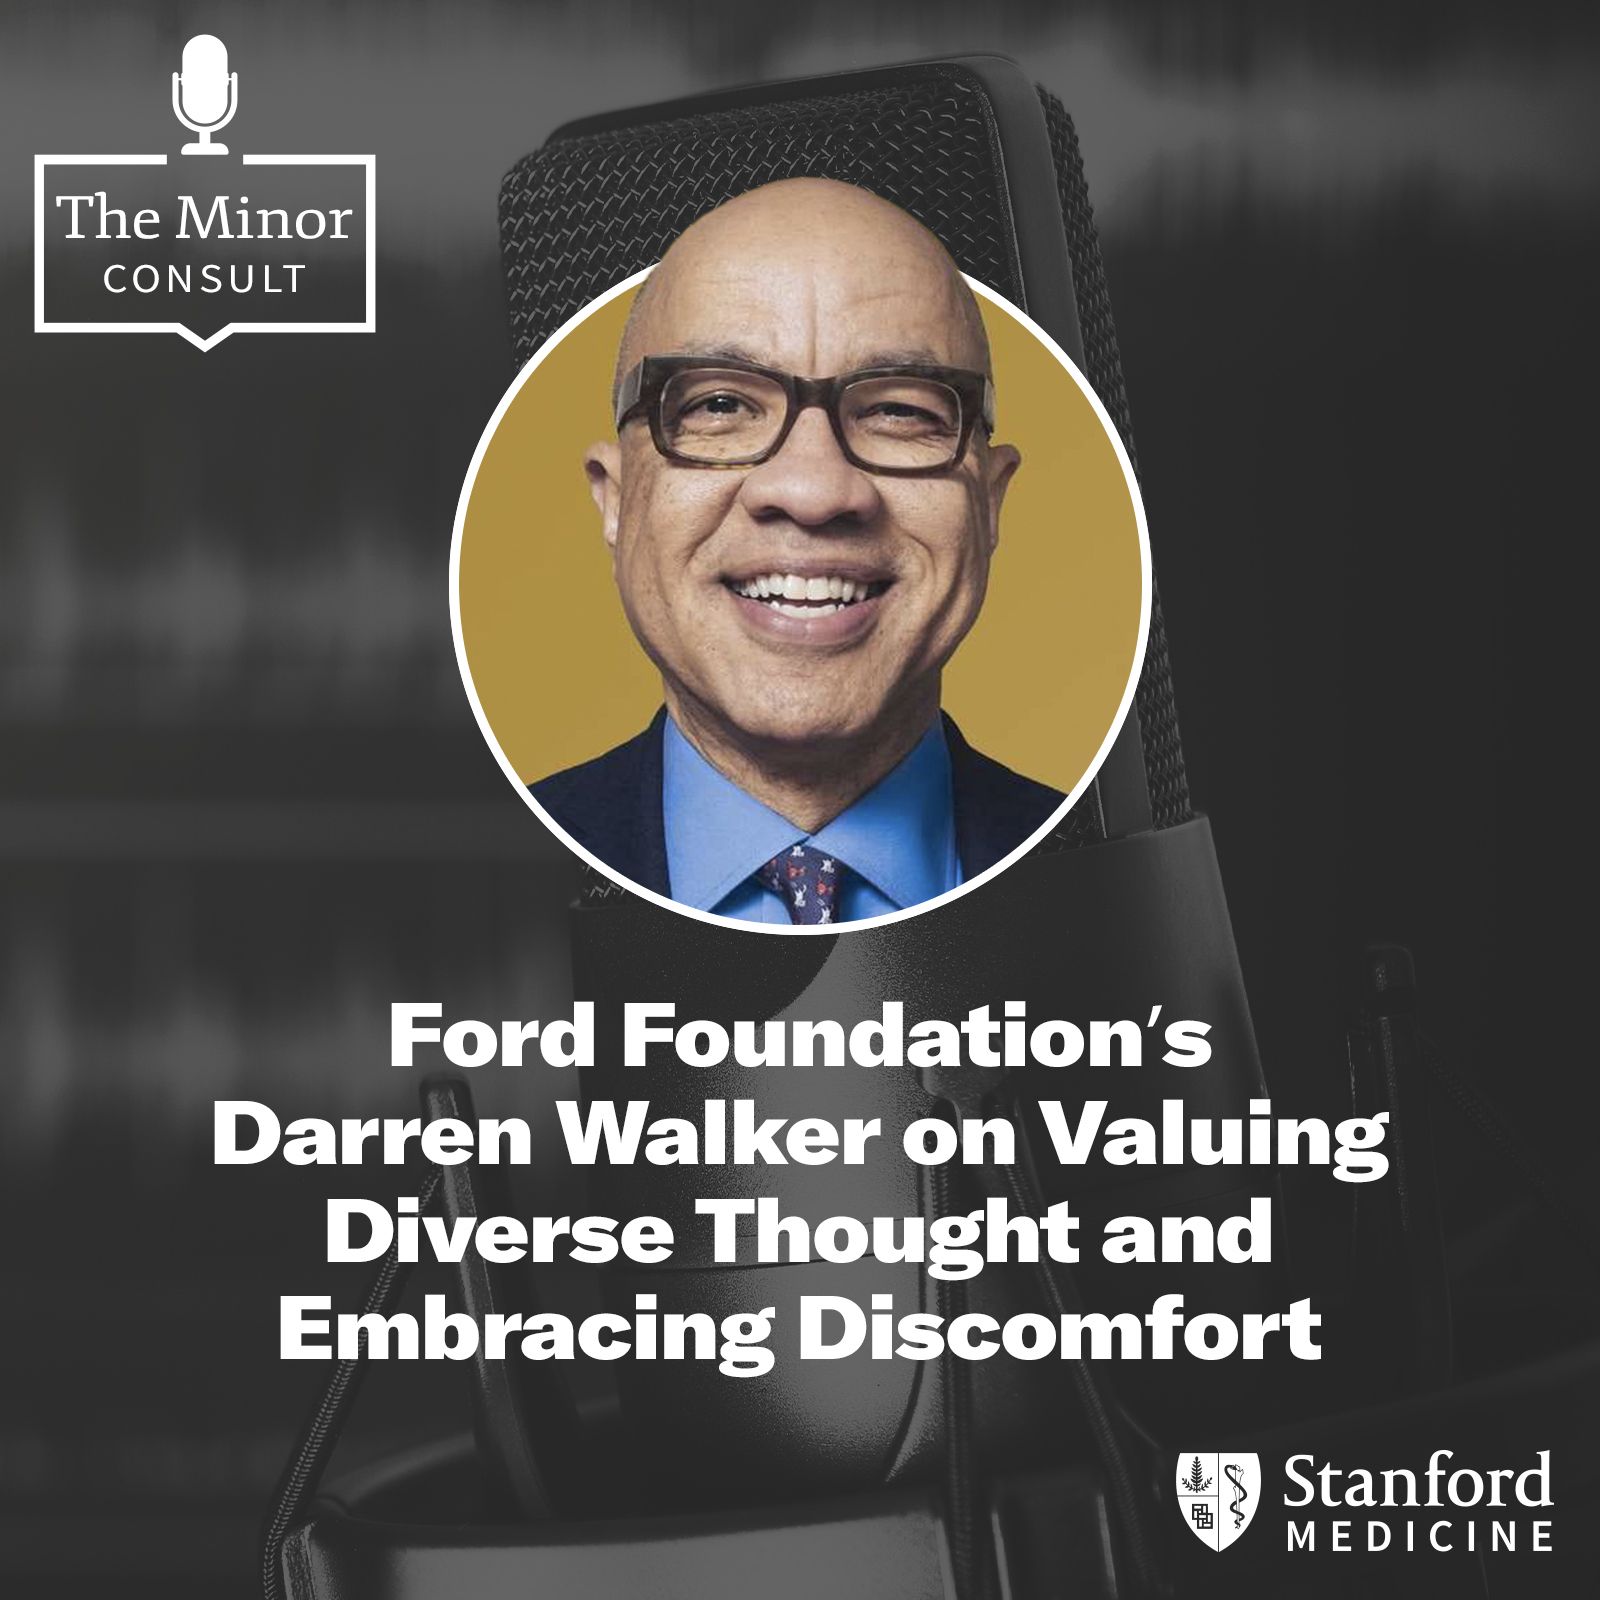 S3 Ep3: Ford Foundation President Darren Walker on Valuing Diverse Thought & Embracing Discomfort